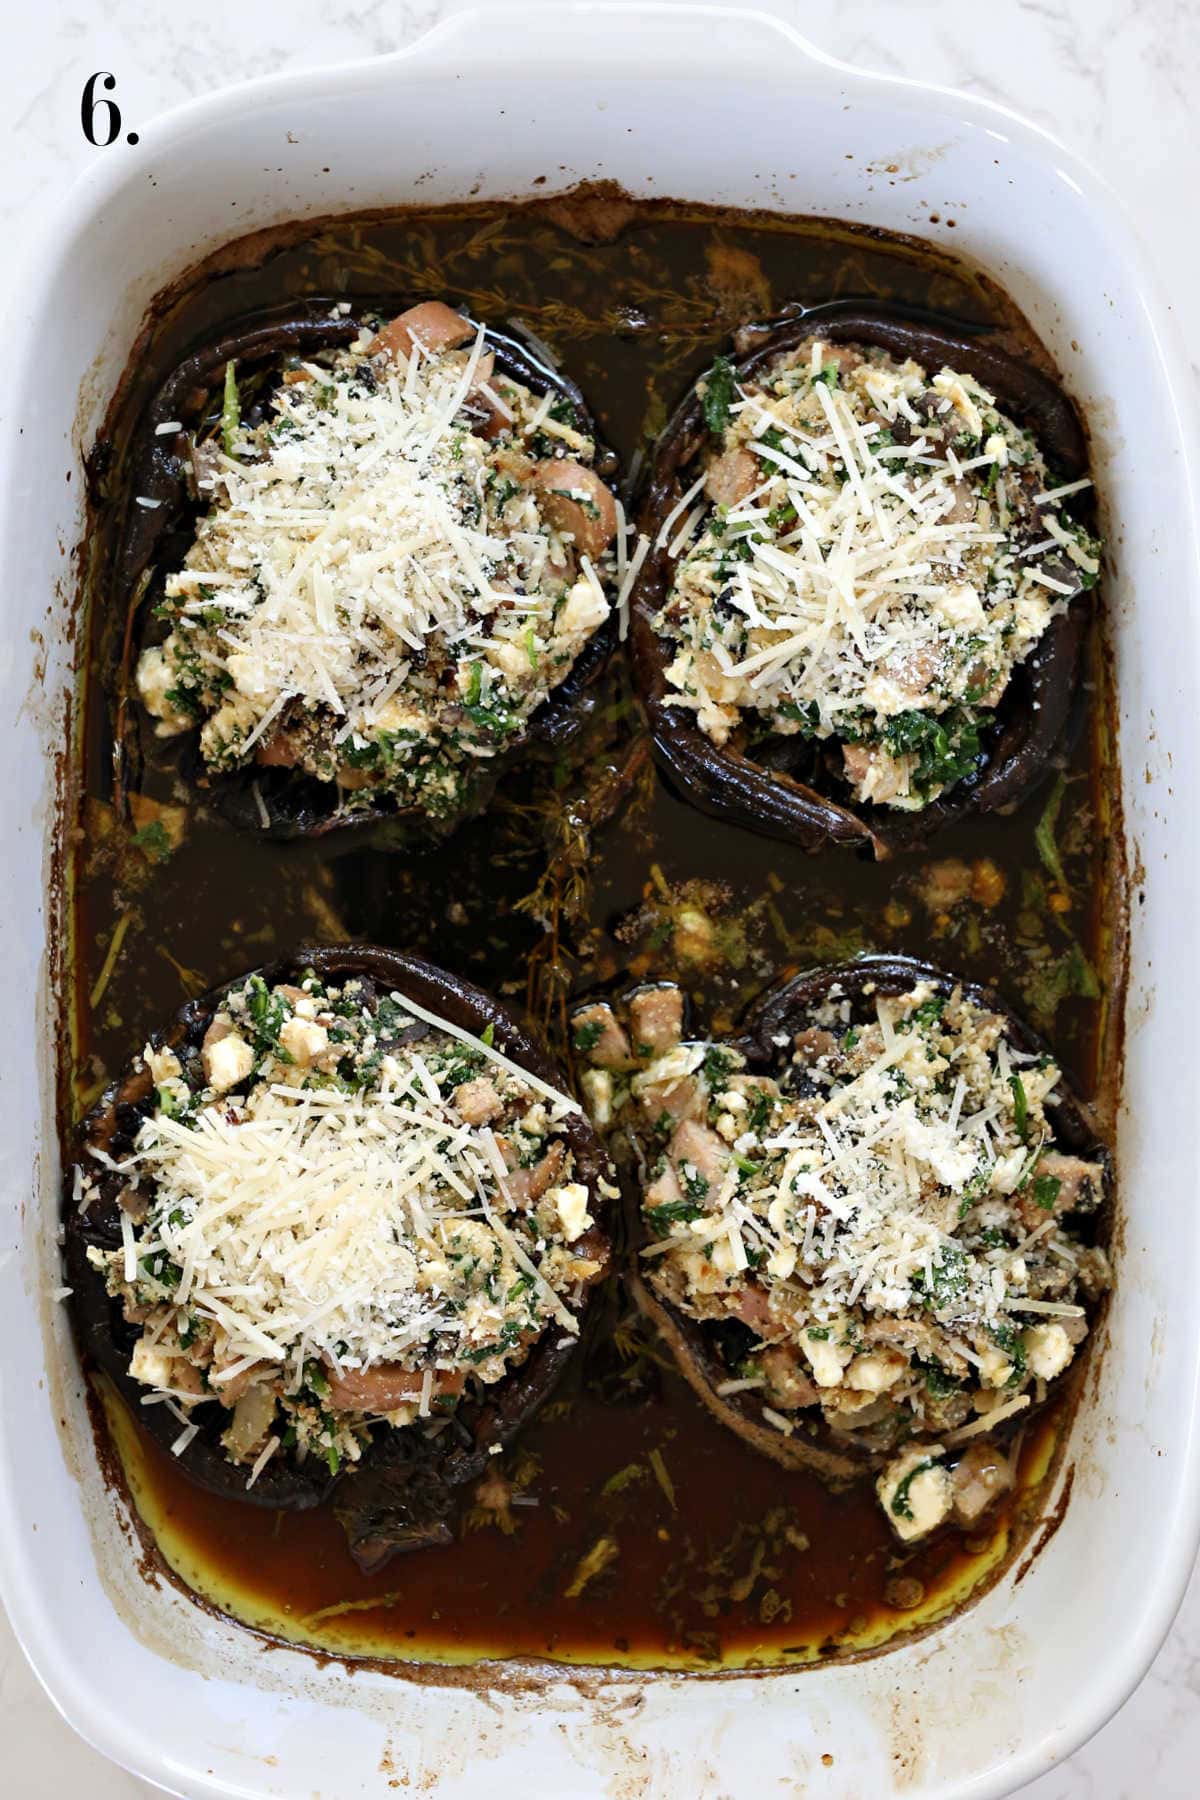 Spinach and sausage filling stuffed in portobello mushrooms in a baking dish.